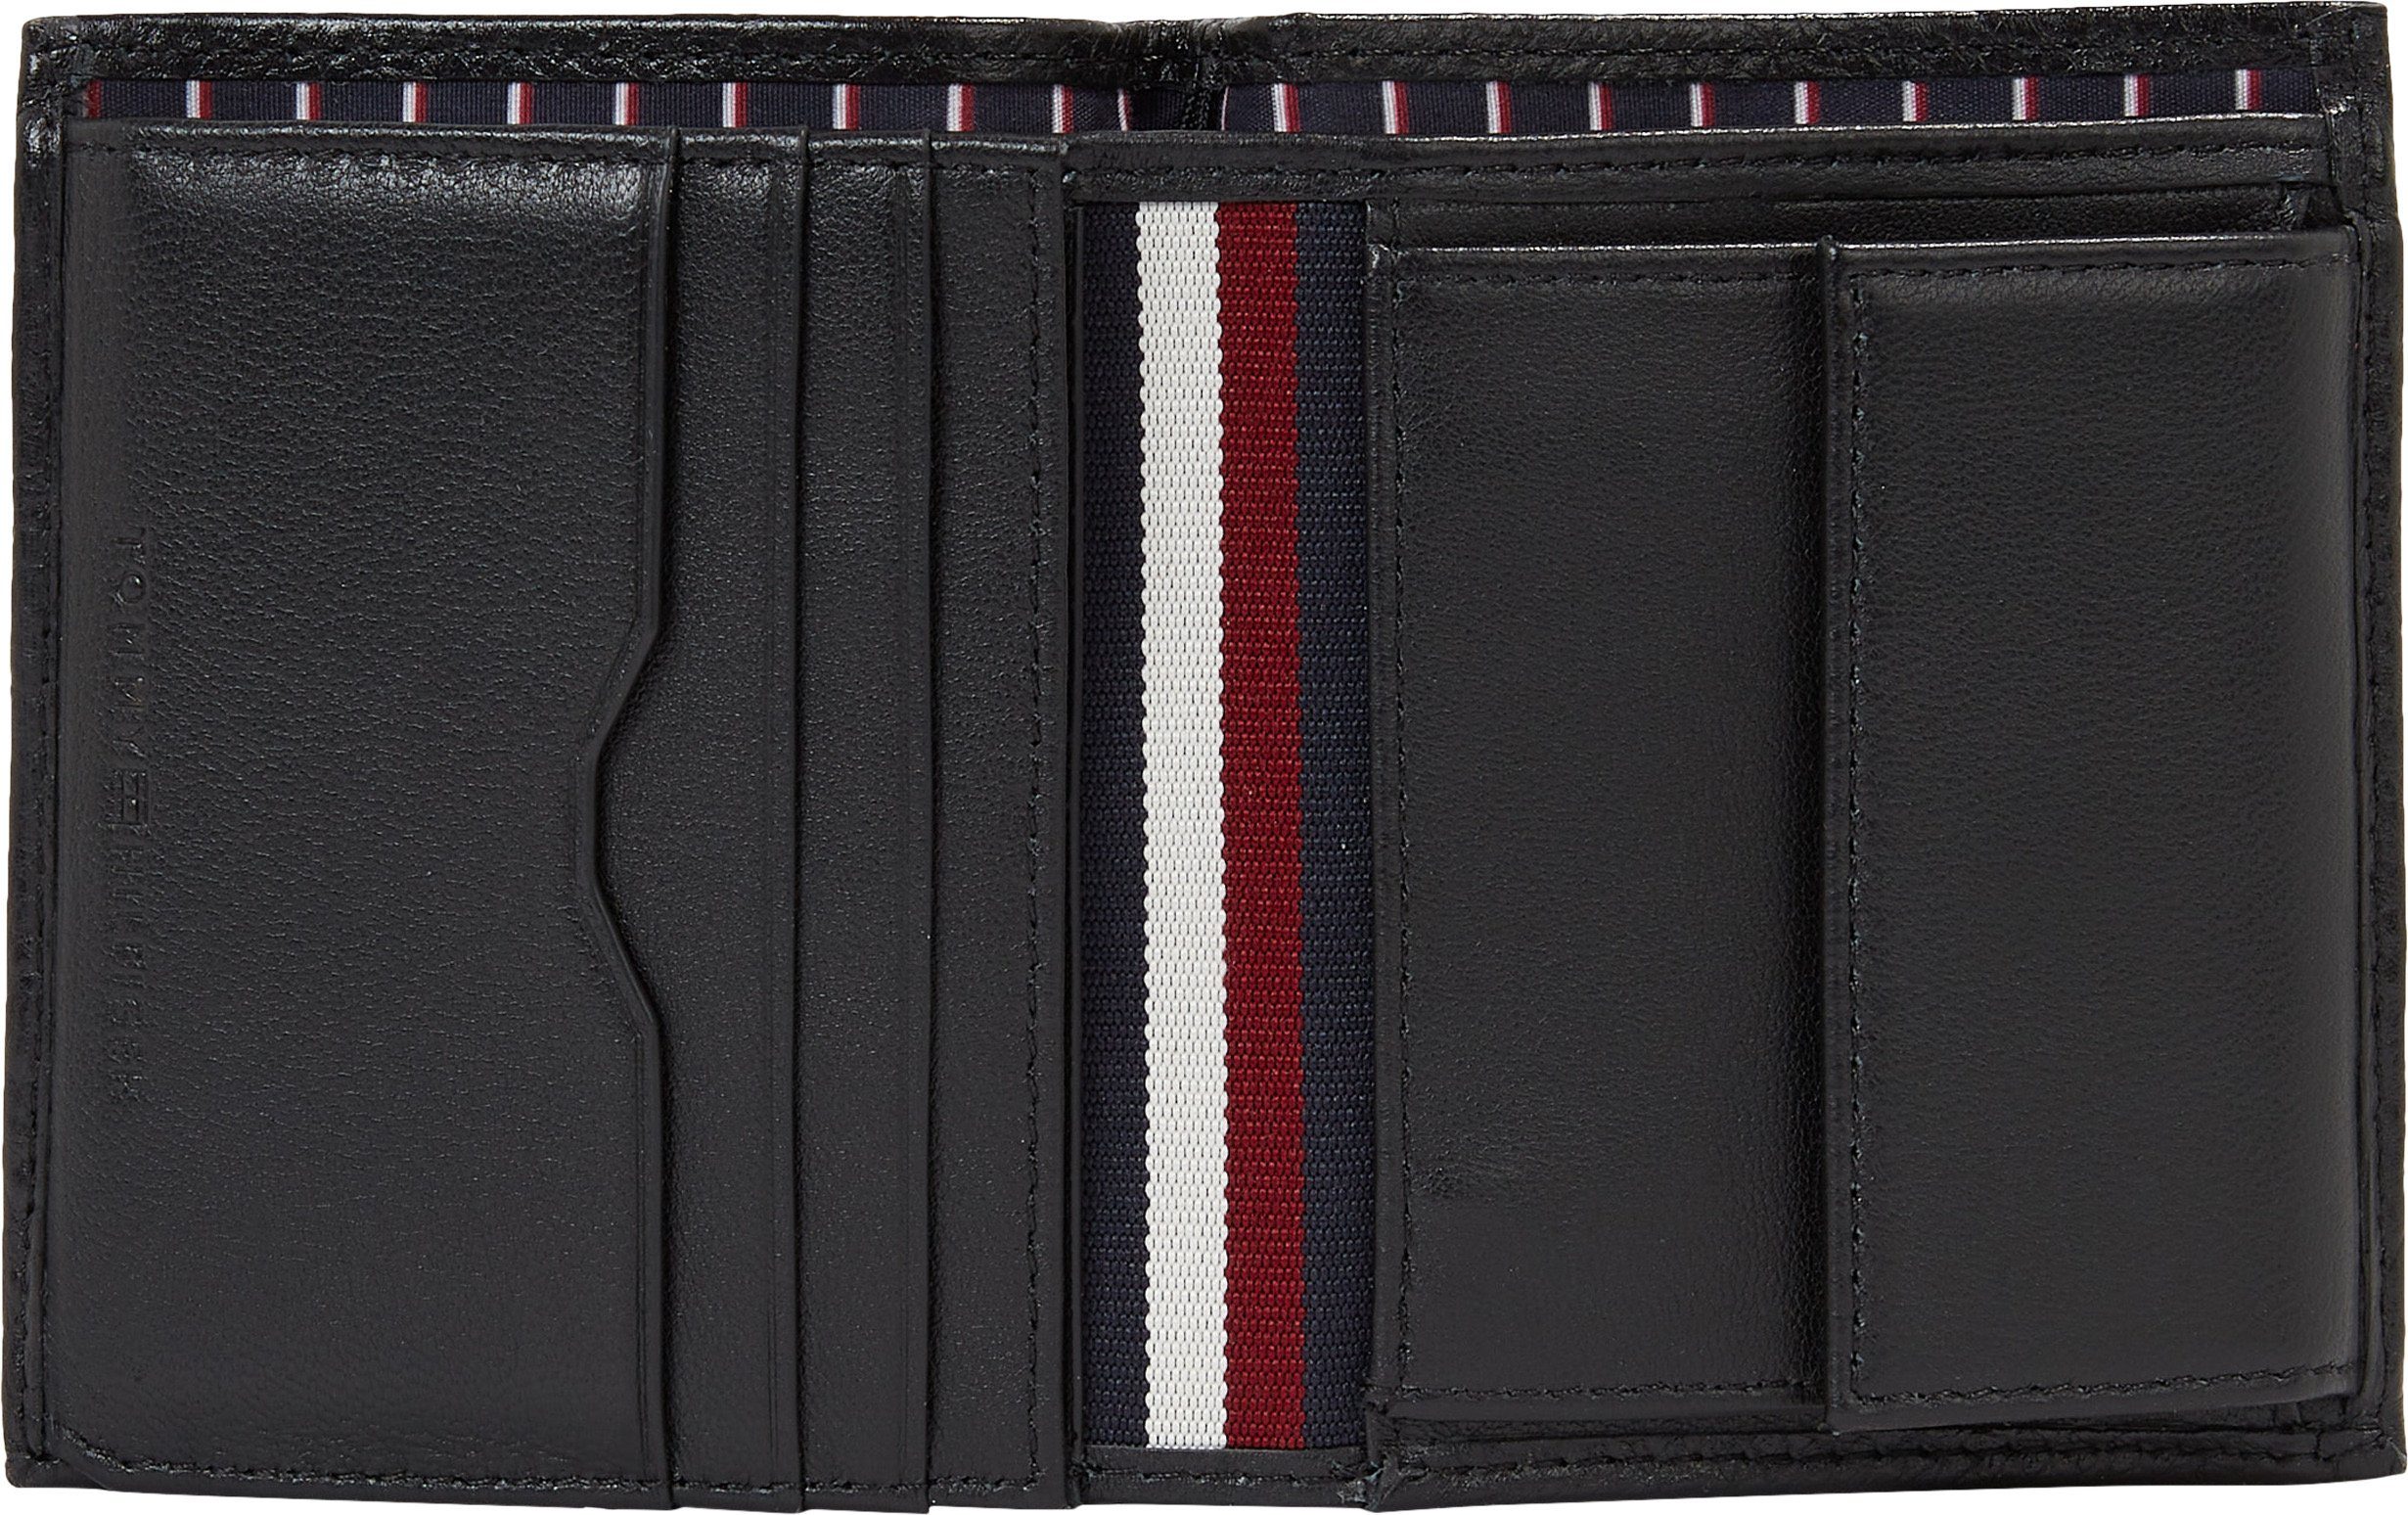 Tommy Hilfiger Portemonnee TH CENTRAL TRIFOLD in een gedessineerde look